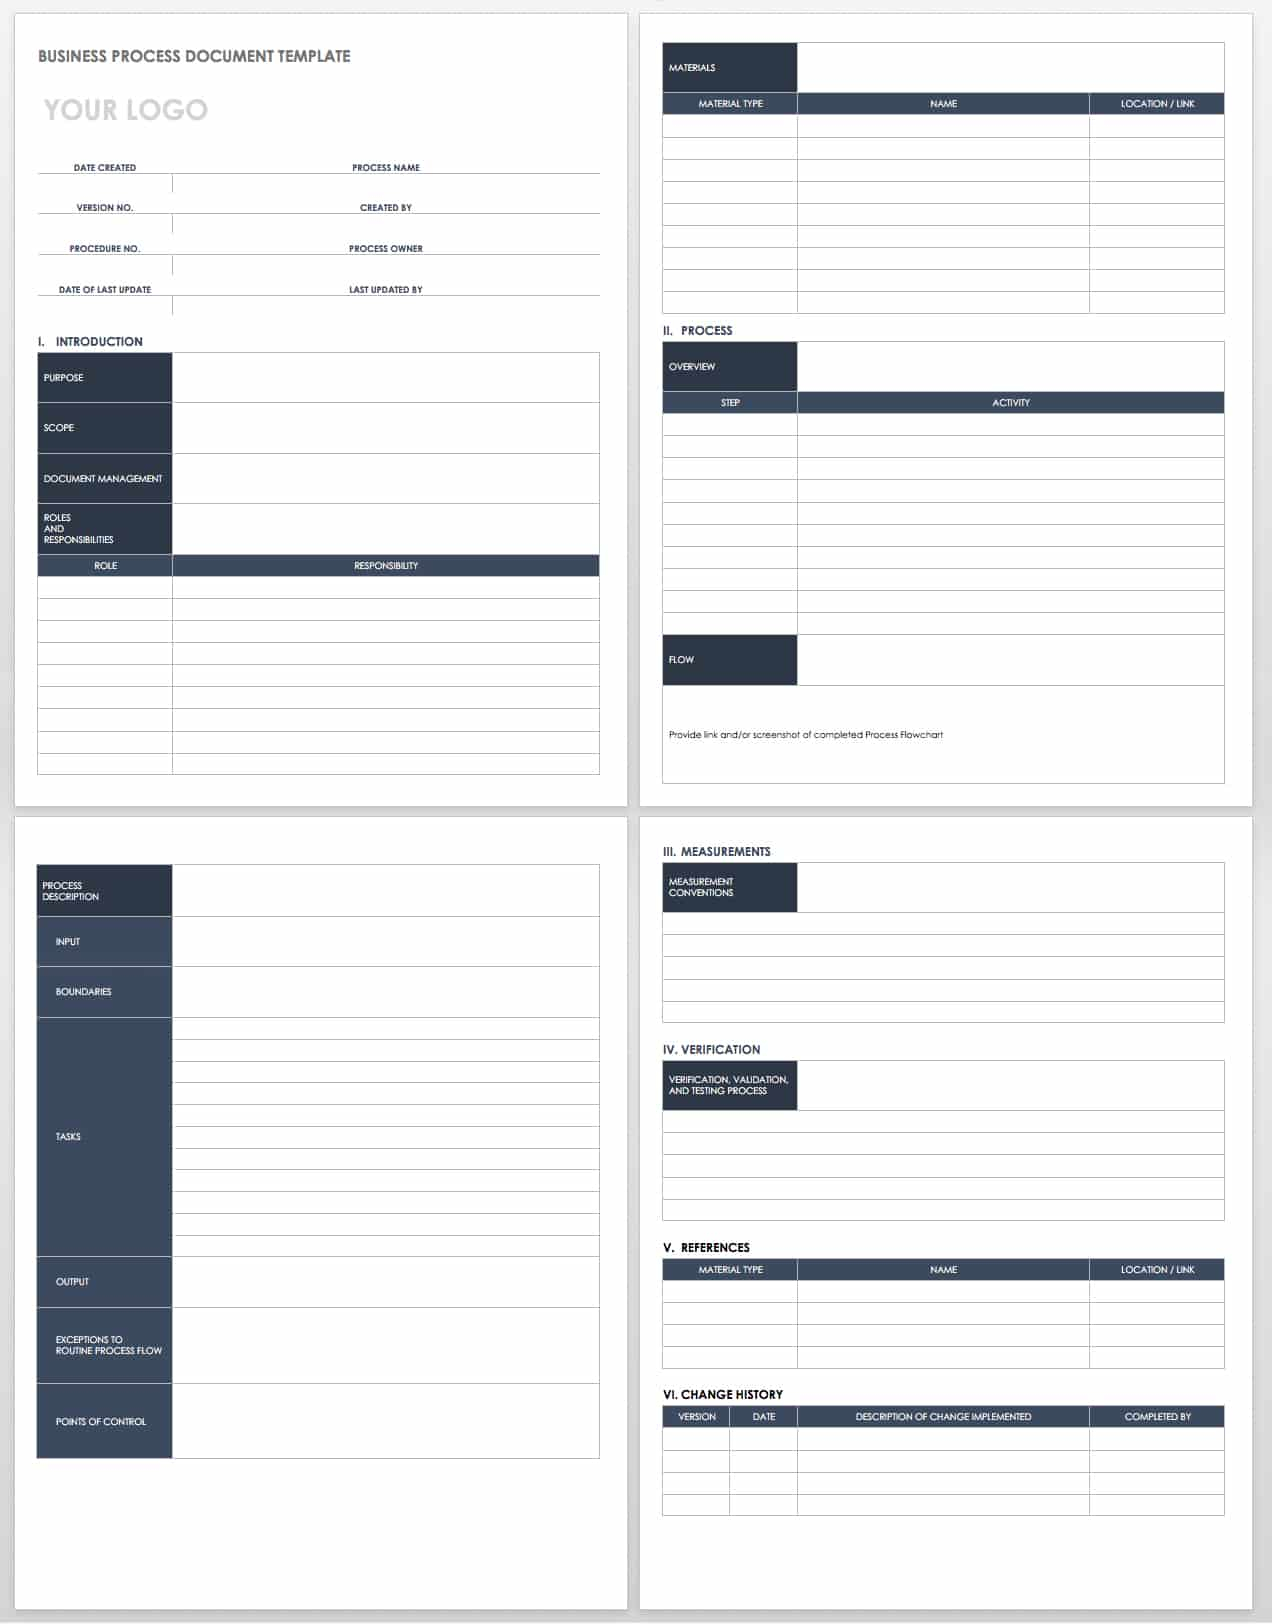 Free Process Document Templates | Smartsheet Throughout Information Mapping Word Template